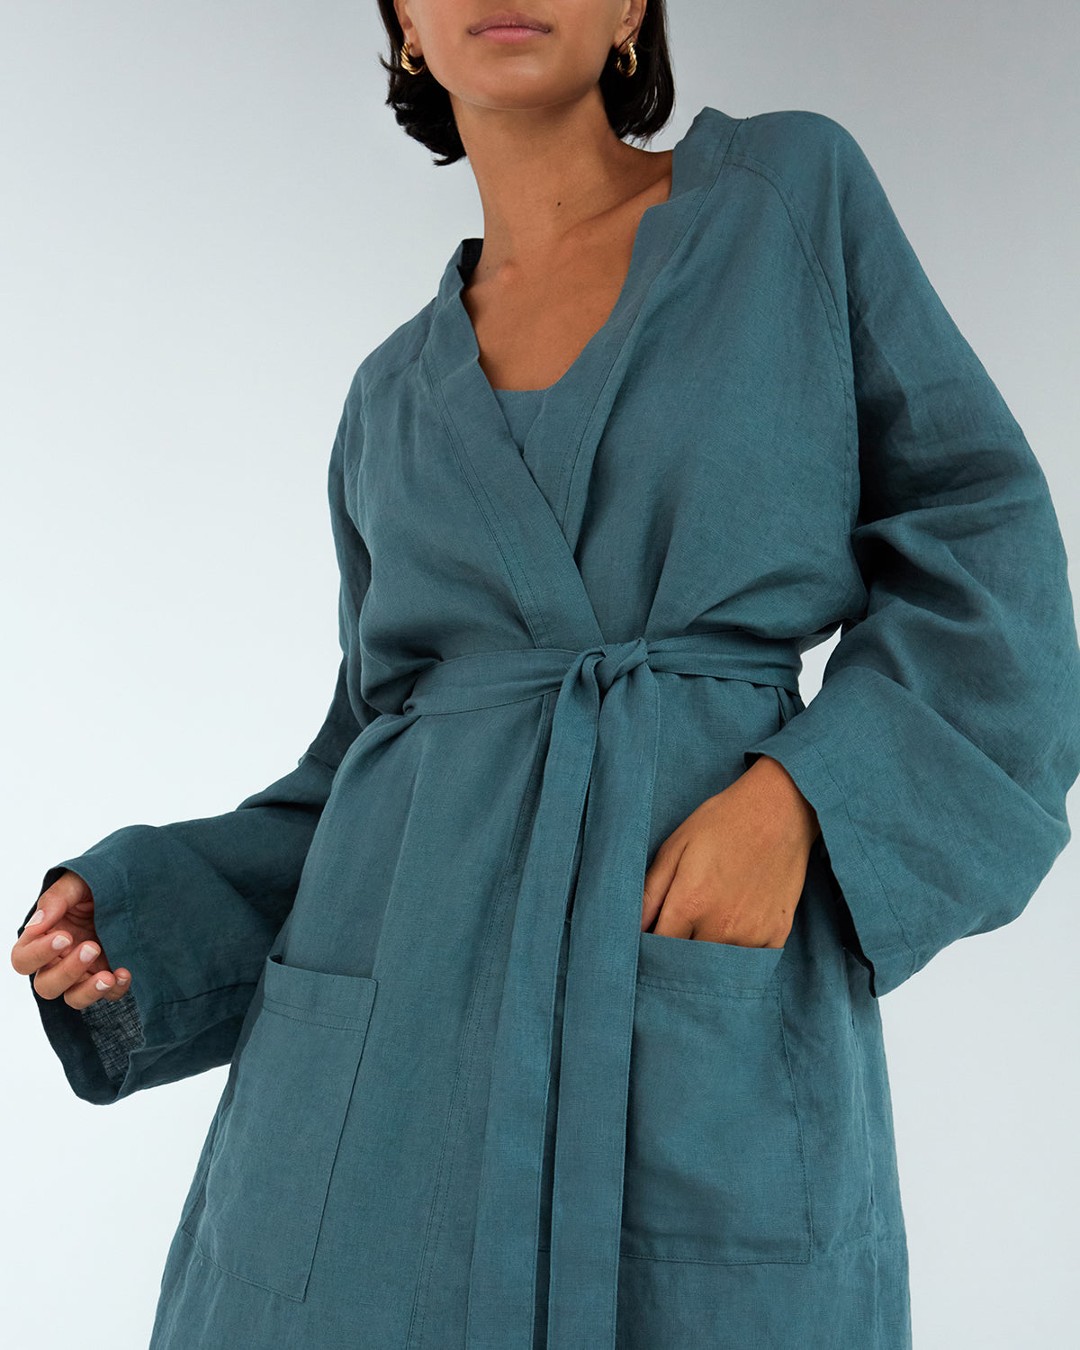 A person wearing a teal coloured linen robe